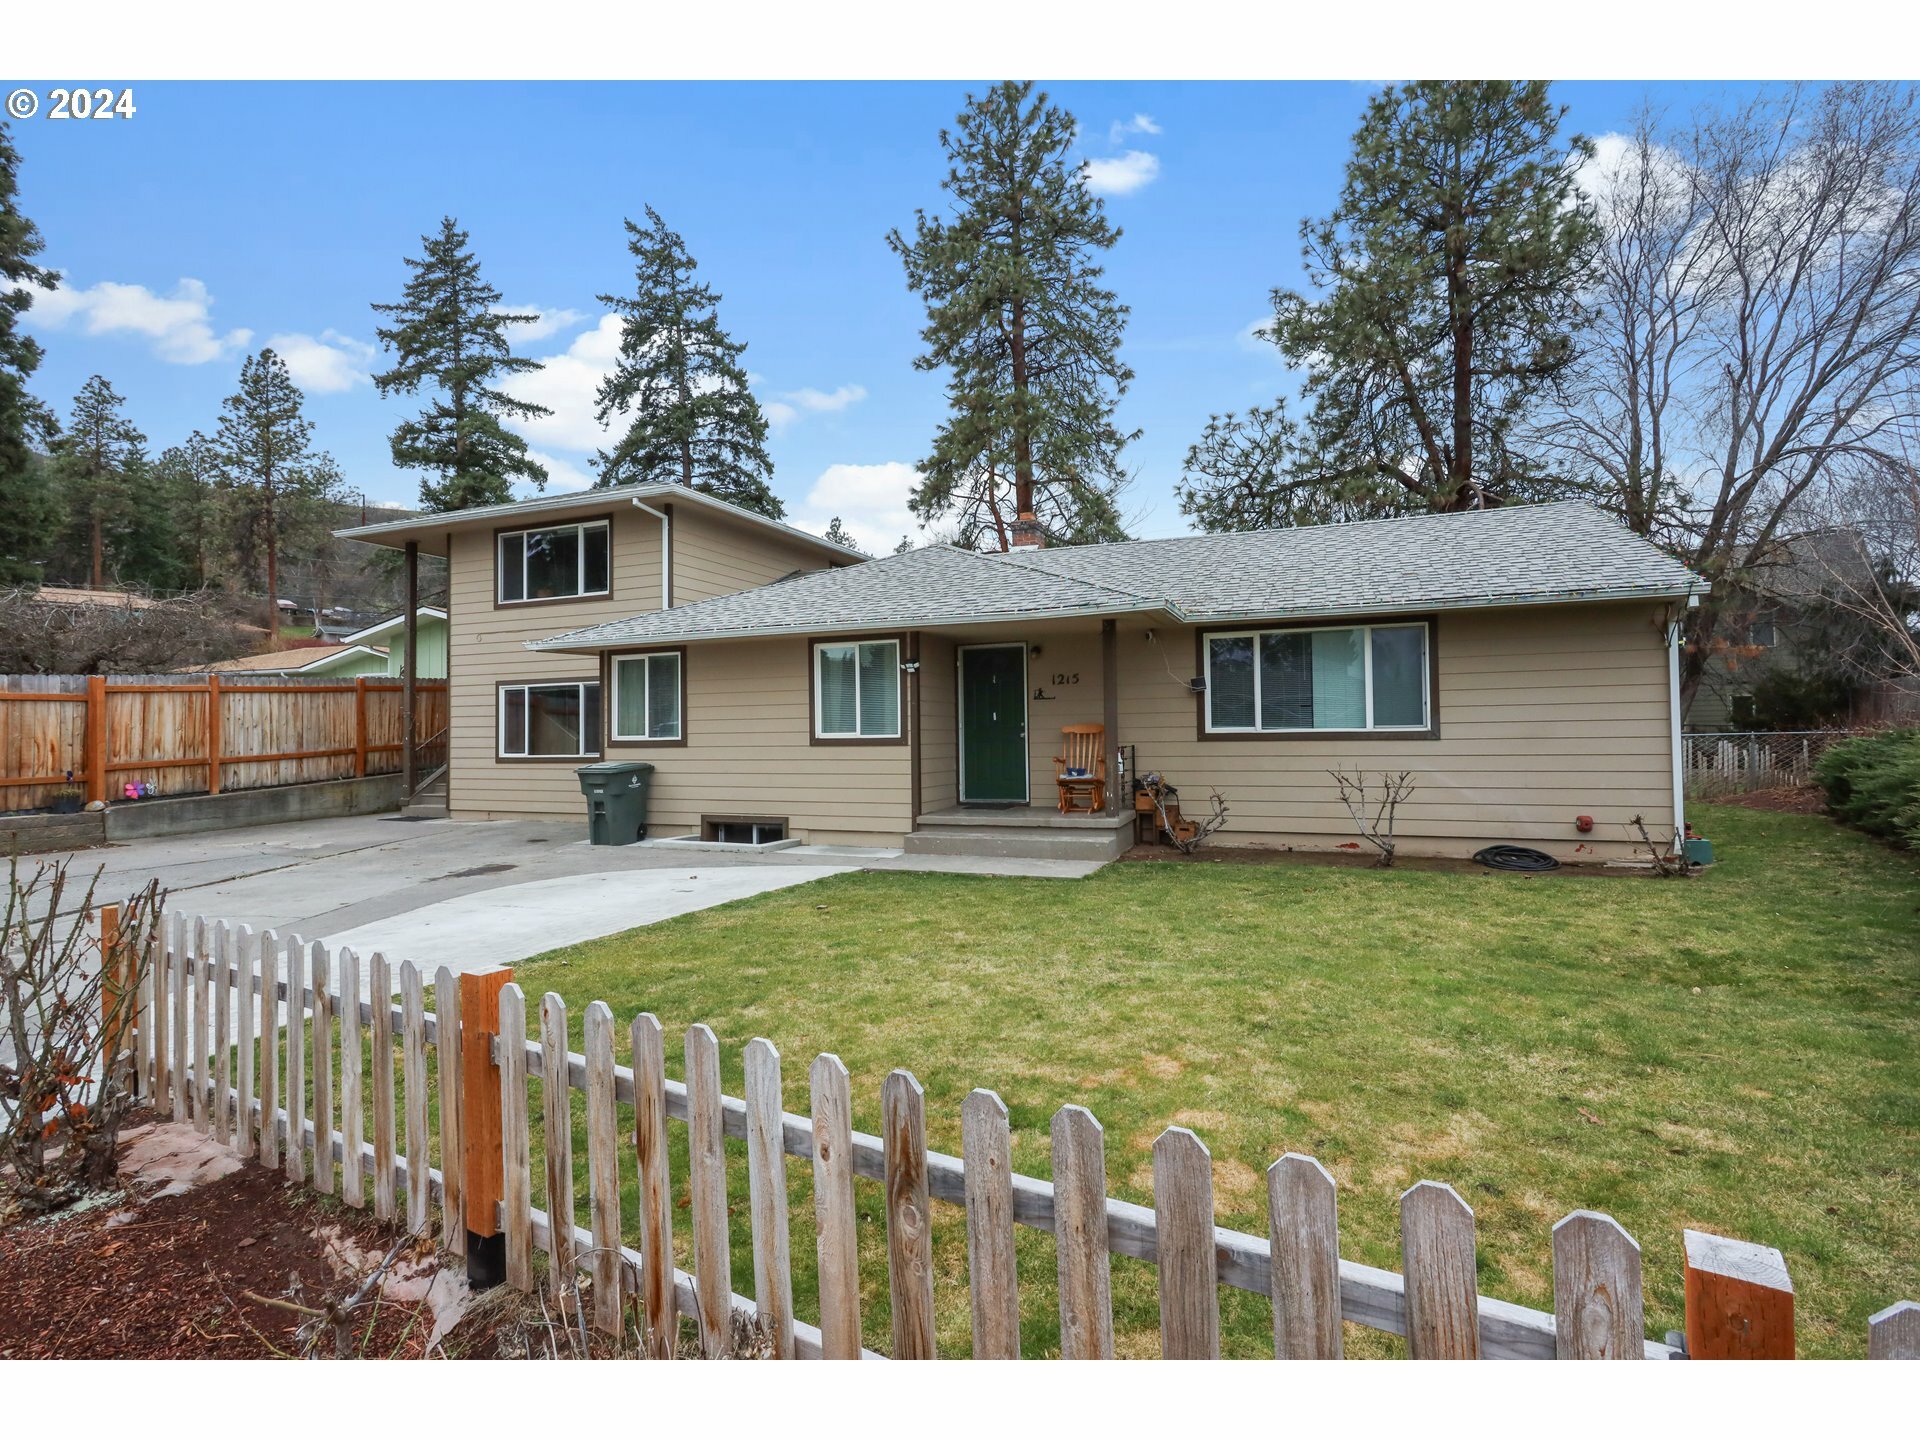 1215/1217 Blakely Dr  The Dalles OR 97058 photo